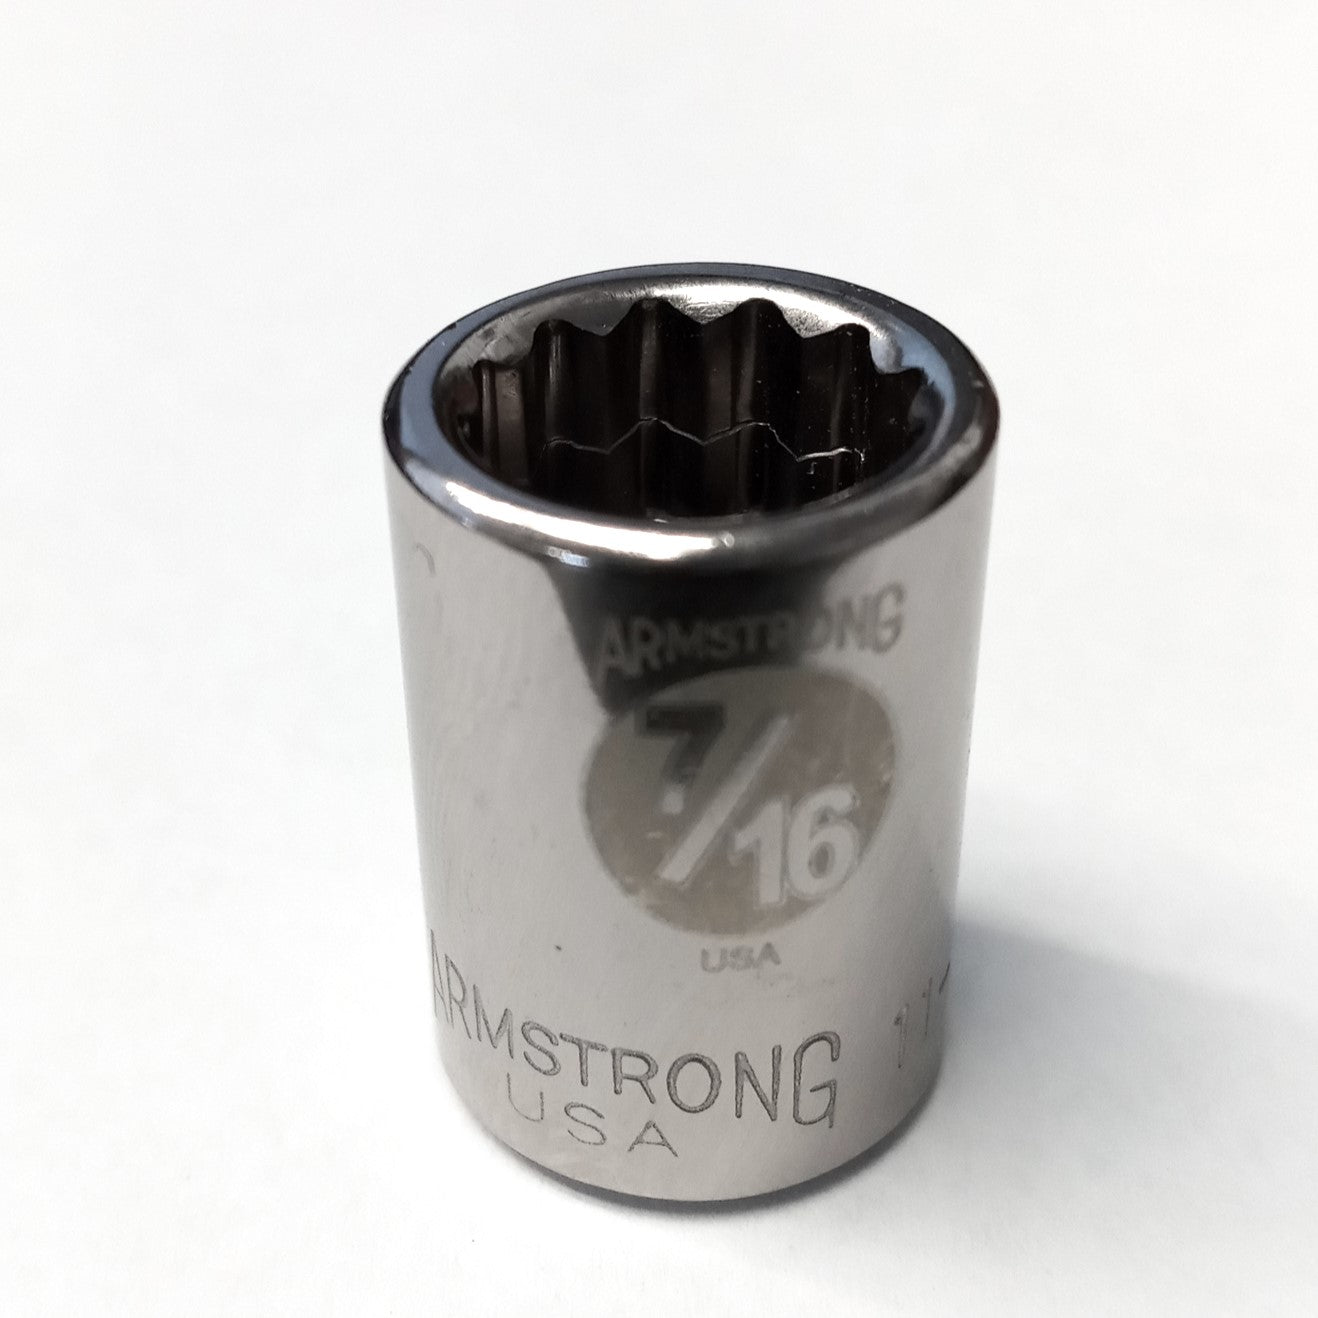 Armstrong 11-114 Socket 7/16" 12 Point, 3/8" Drive USA #21